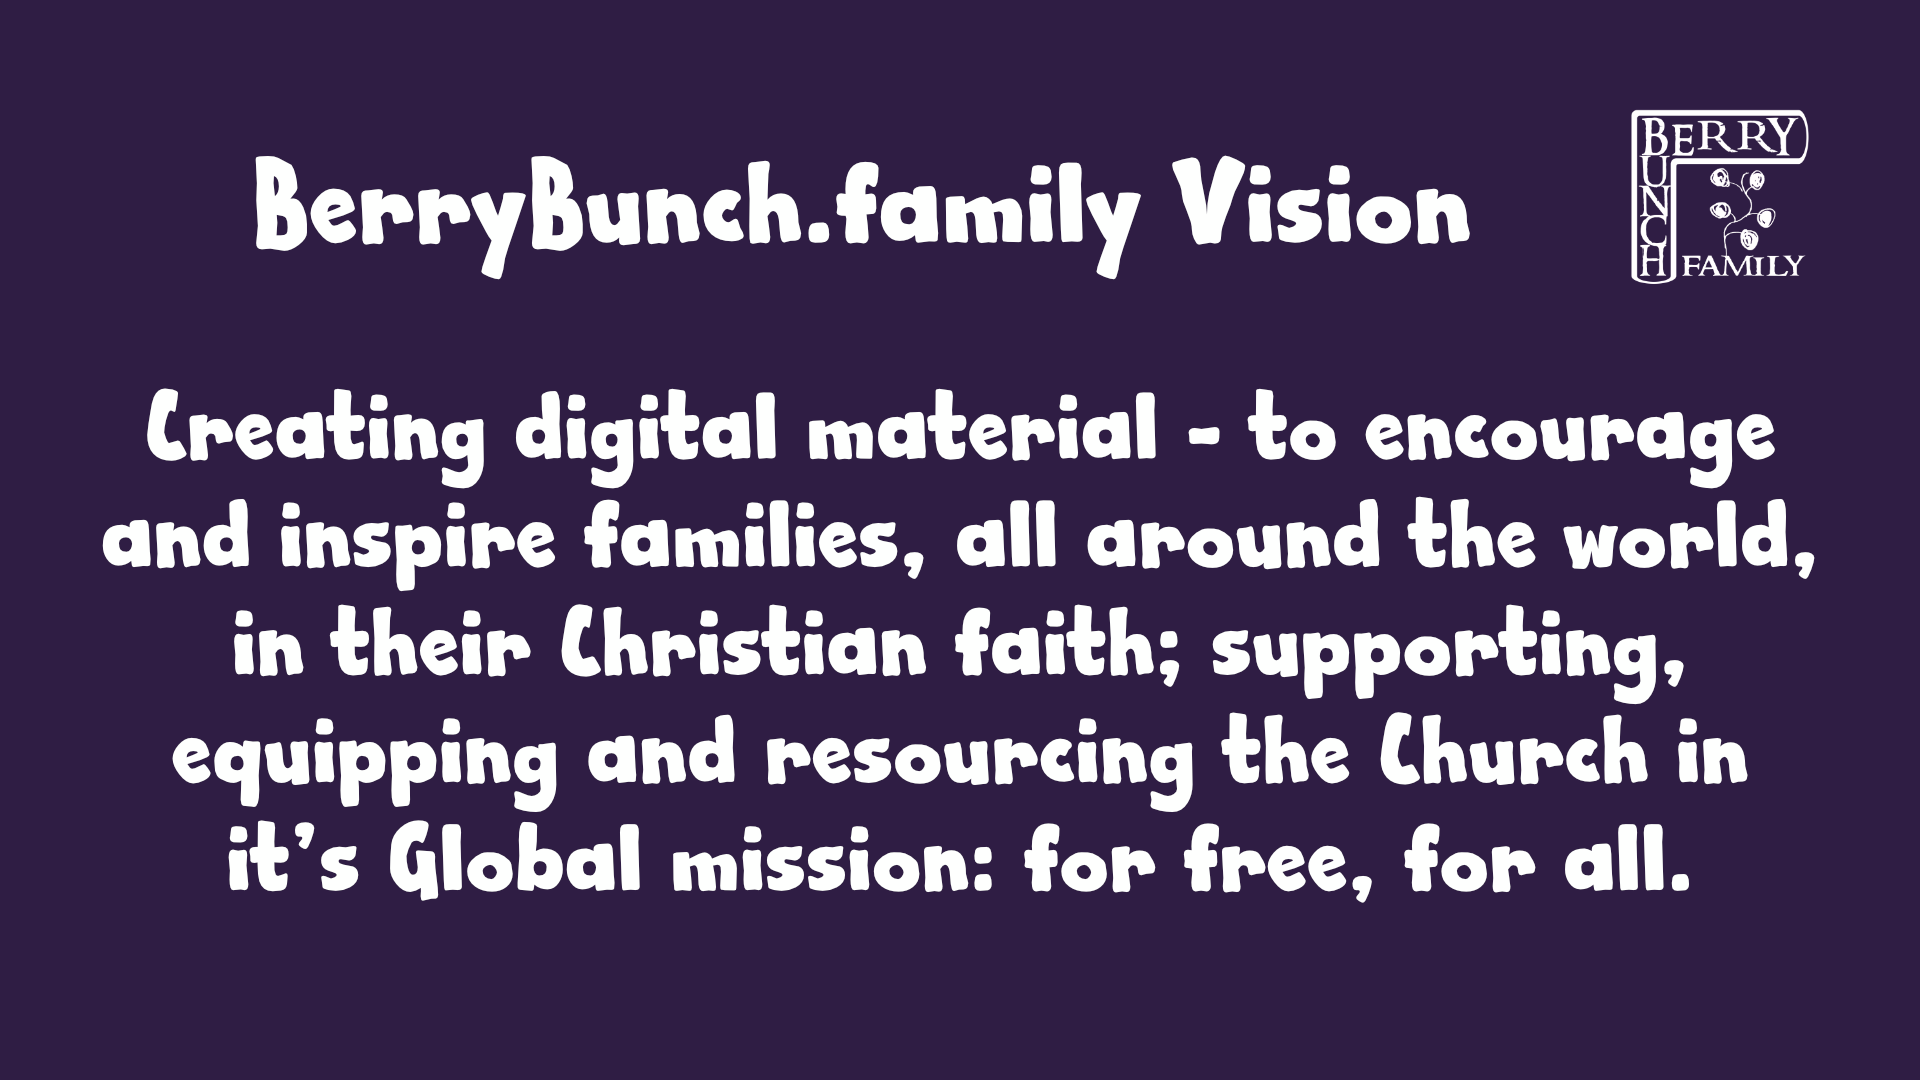 BerryBunch family vision, 2022